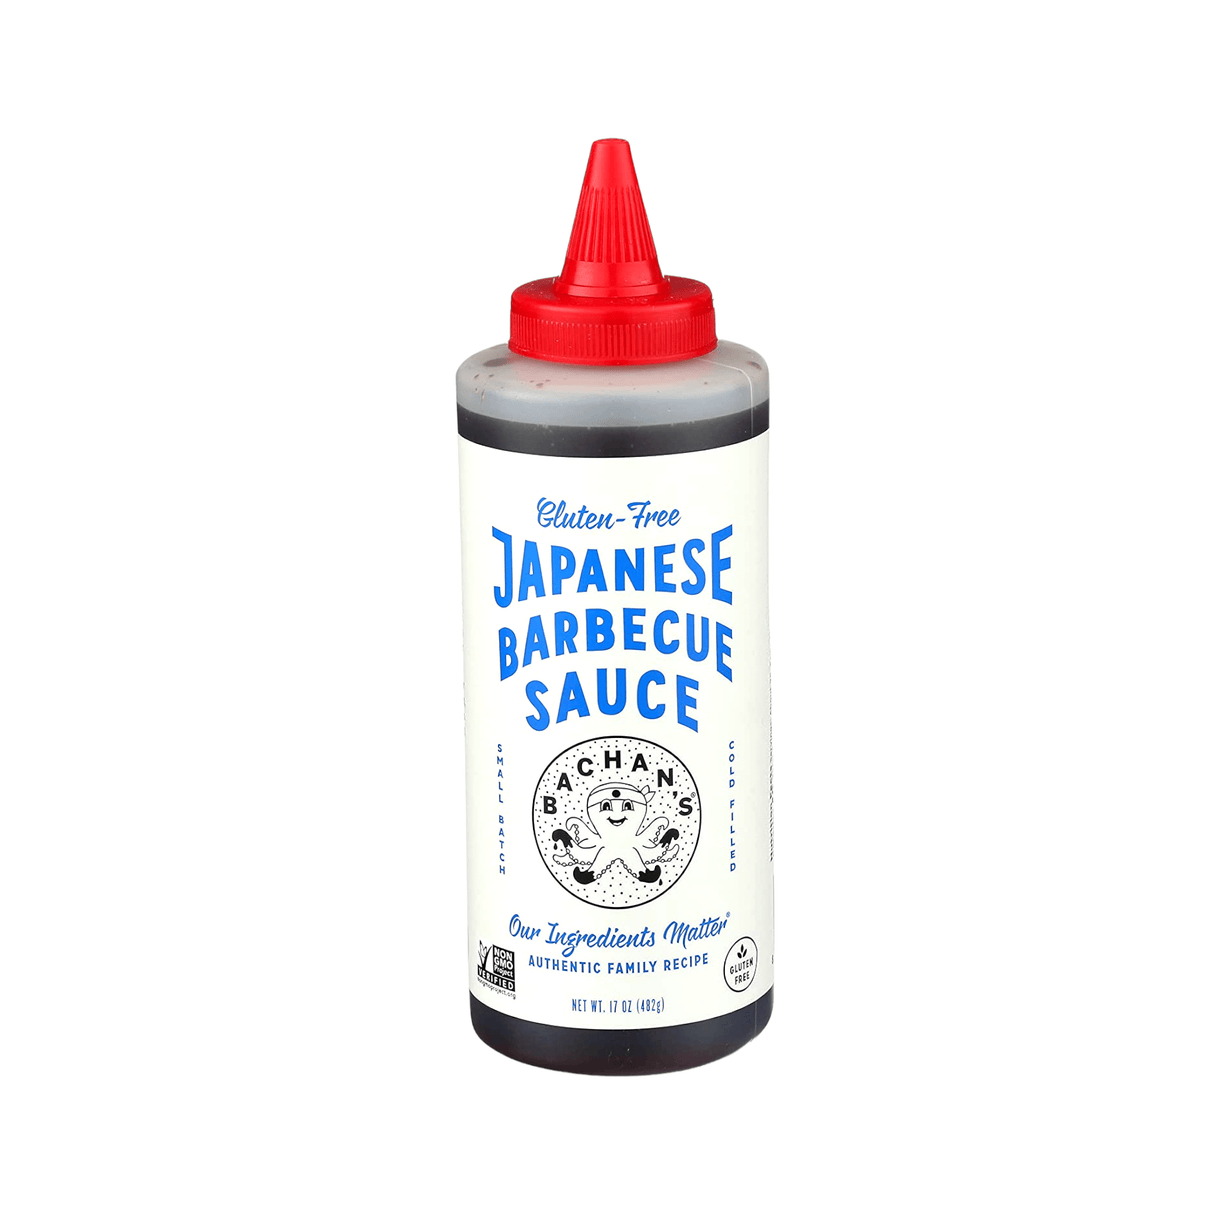 Bachan’s Gluten-Free Japanese Barbecue Sauce